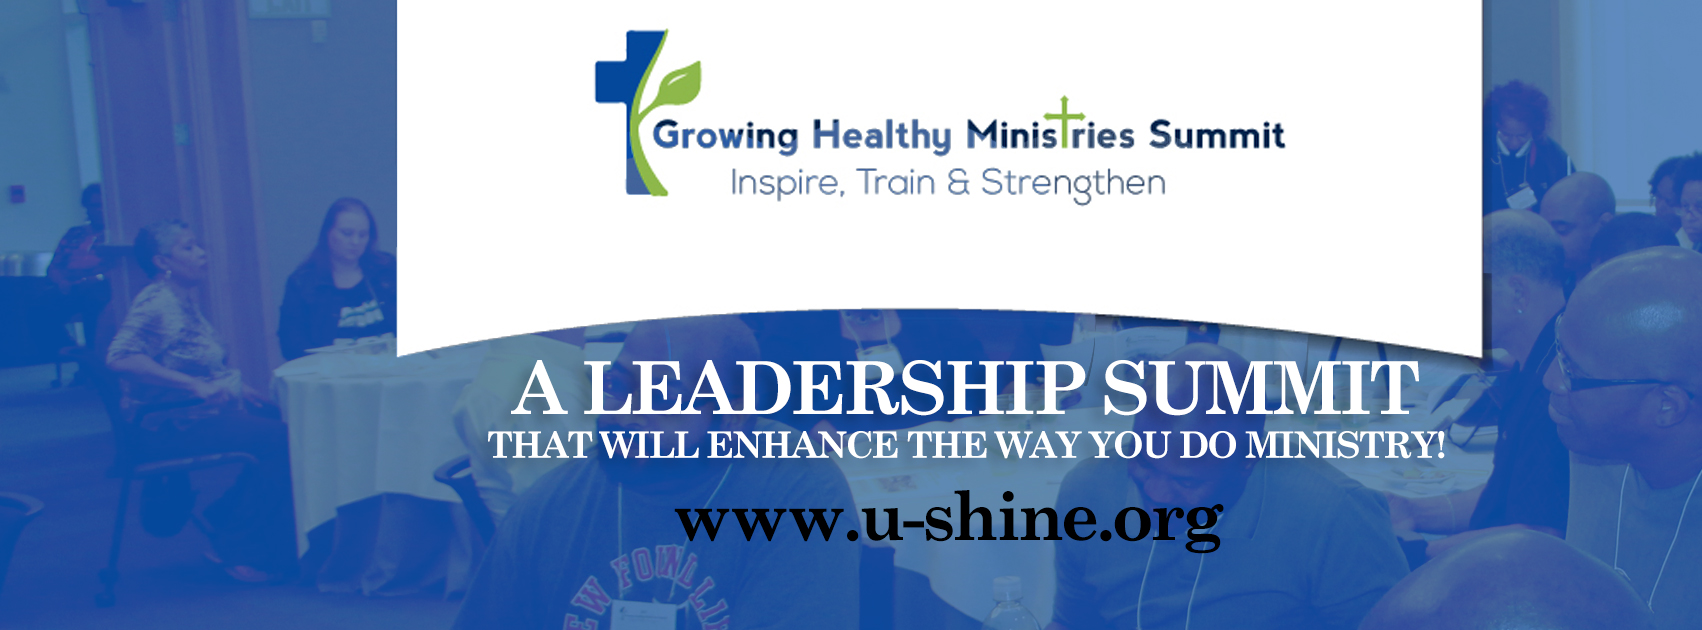 Growing Healthy Ministries